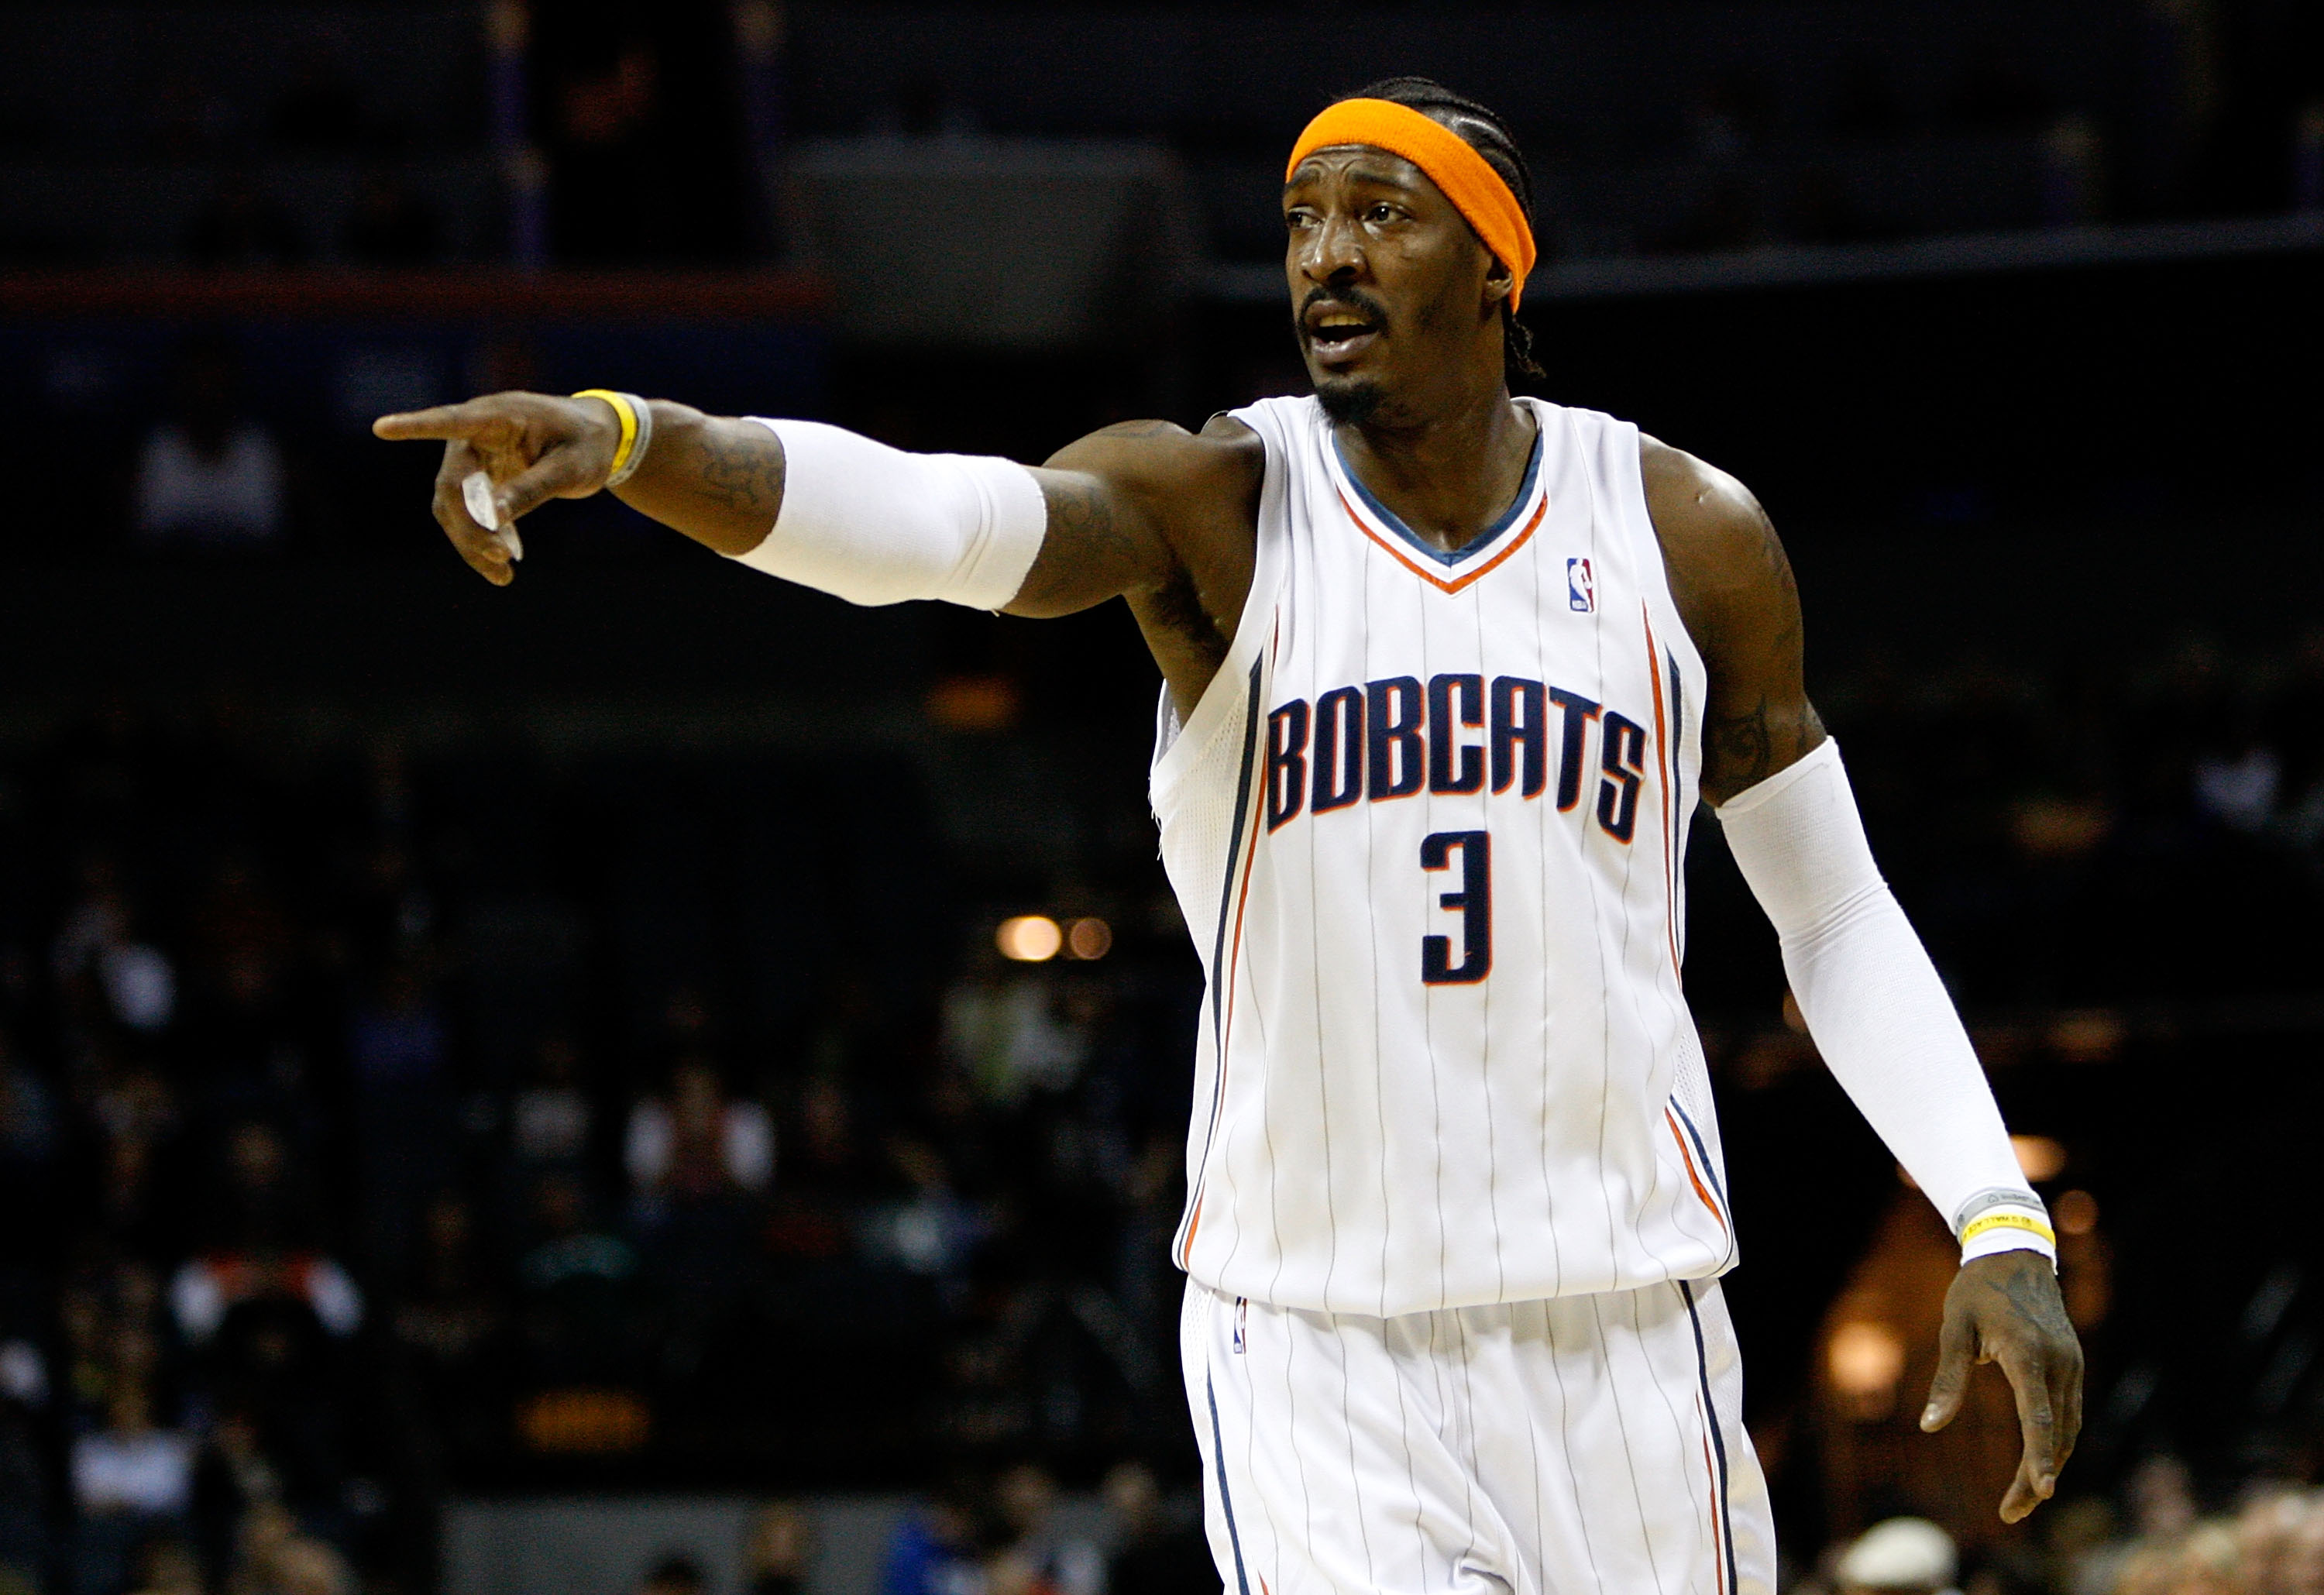 CHARLOTTE, NC - JANUARY 15:  Gerald Wallace #3 of the Charlotte Bobcats reacts during their game against the San Antonio Spurs at Time Warner Cable Arena on January 15, 2010 in Charlotte, North Carolina. NOTE TO USER: User expressly acknowledges and agree